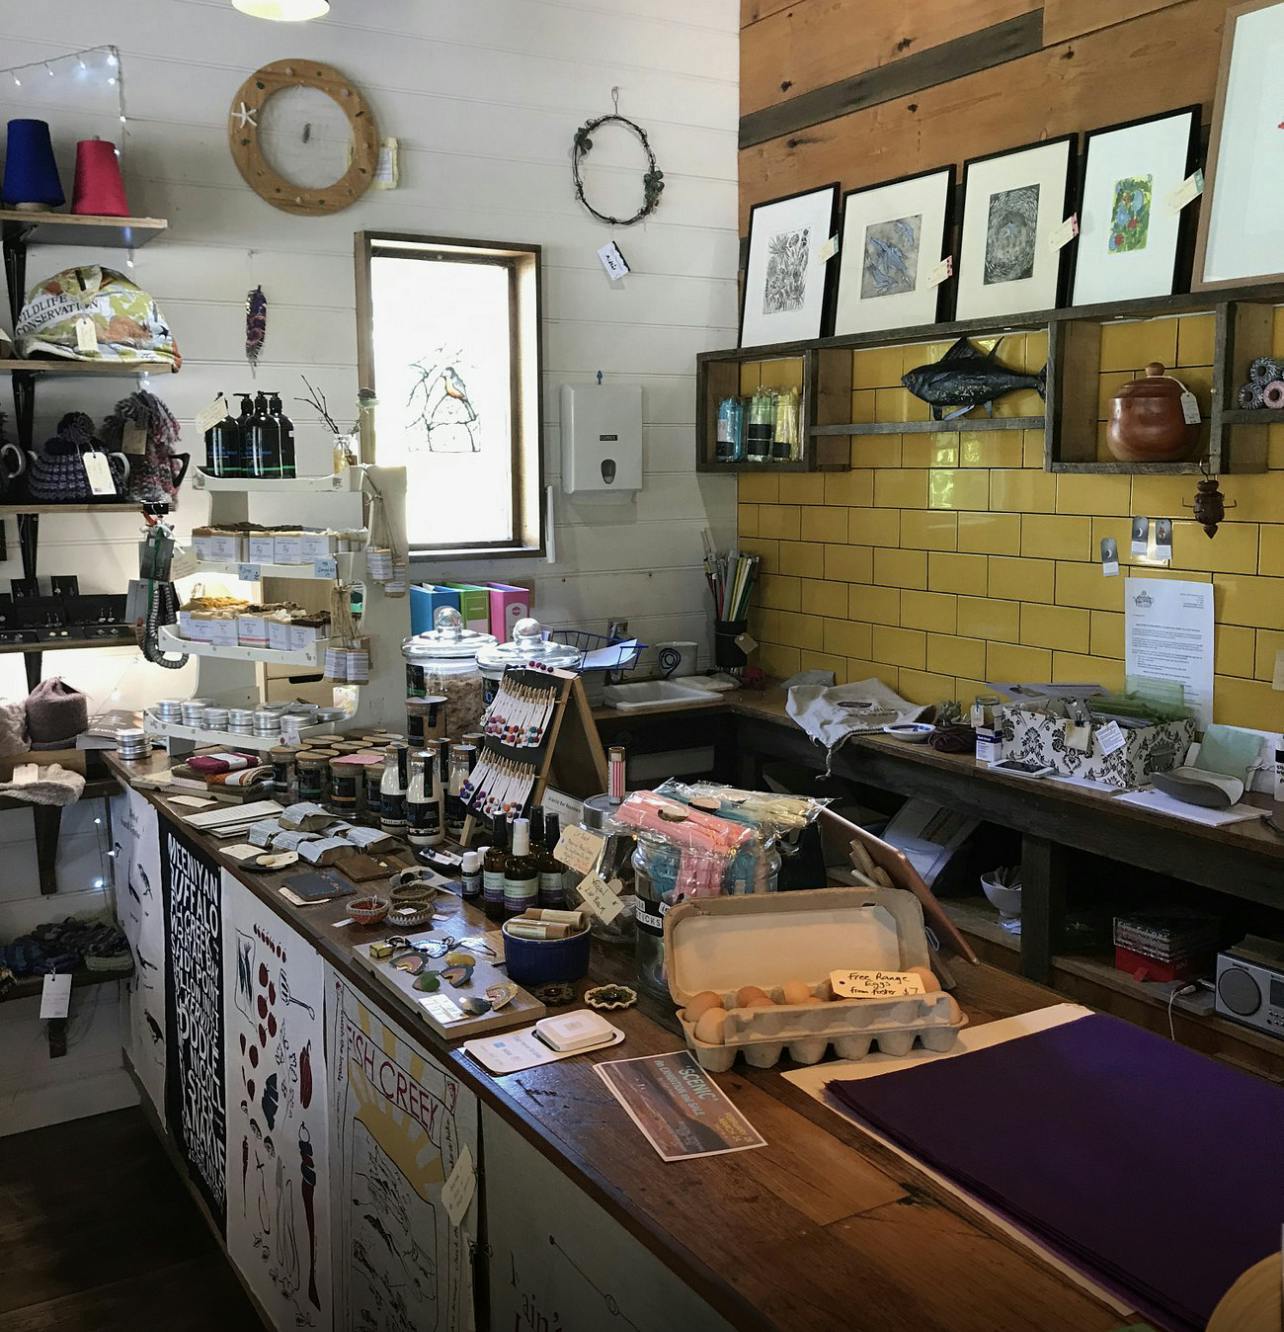 Come visit the Handmakers Store Fish Creek